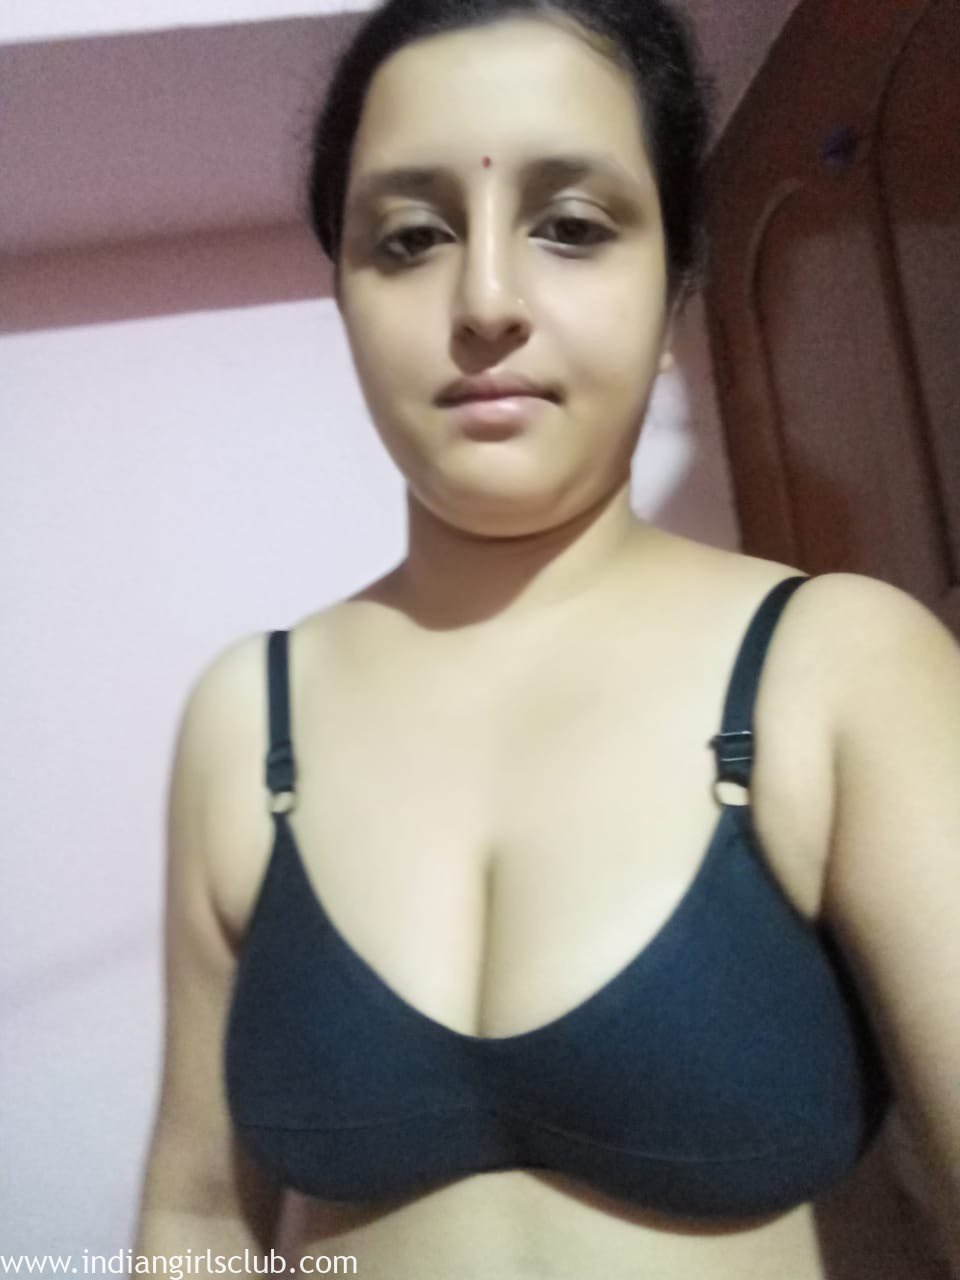 big-tits-bengali-indian-housewife-ready-for-hot-sex-10 - Indian Girls Club 